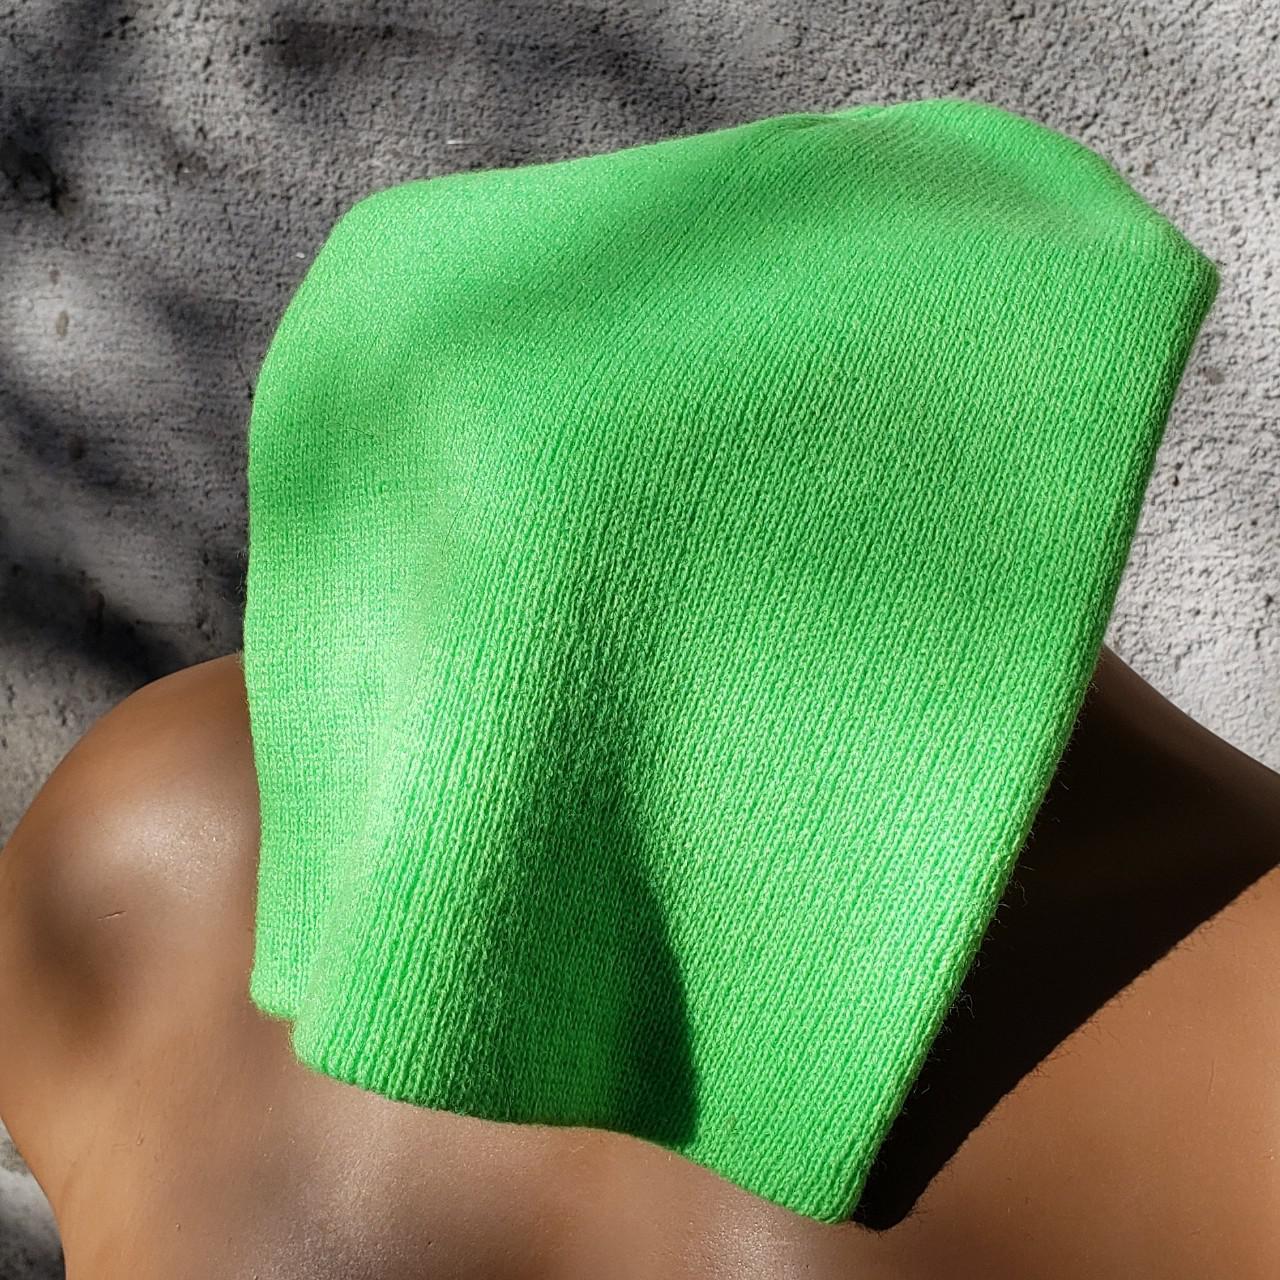 Product Image 2 - Neon green dreams hat by